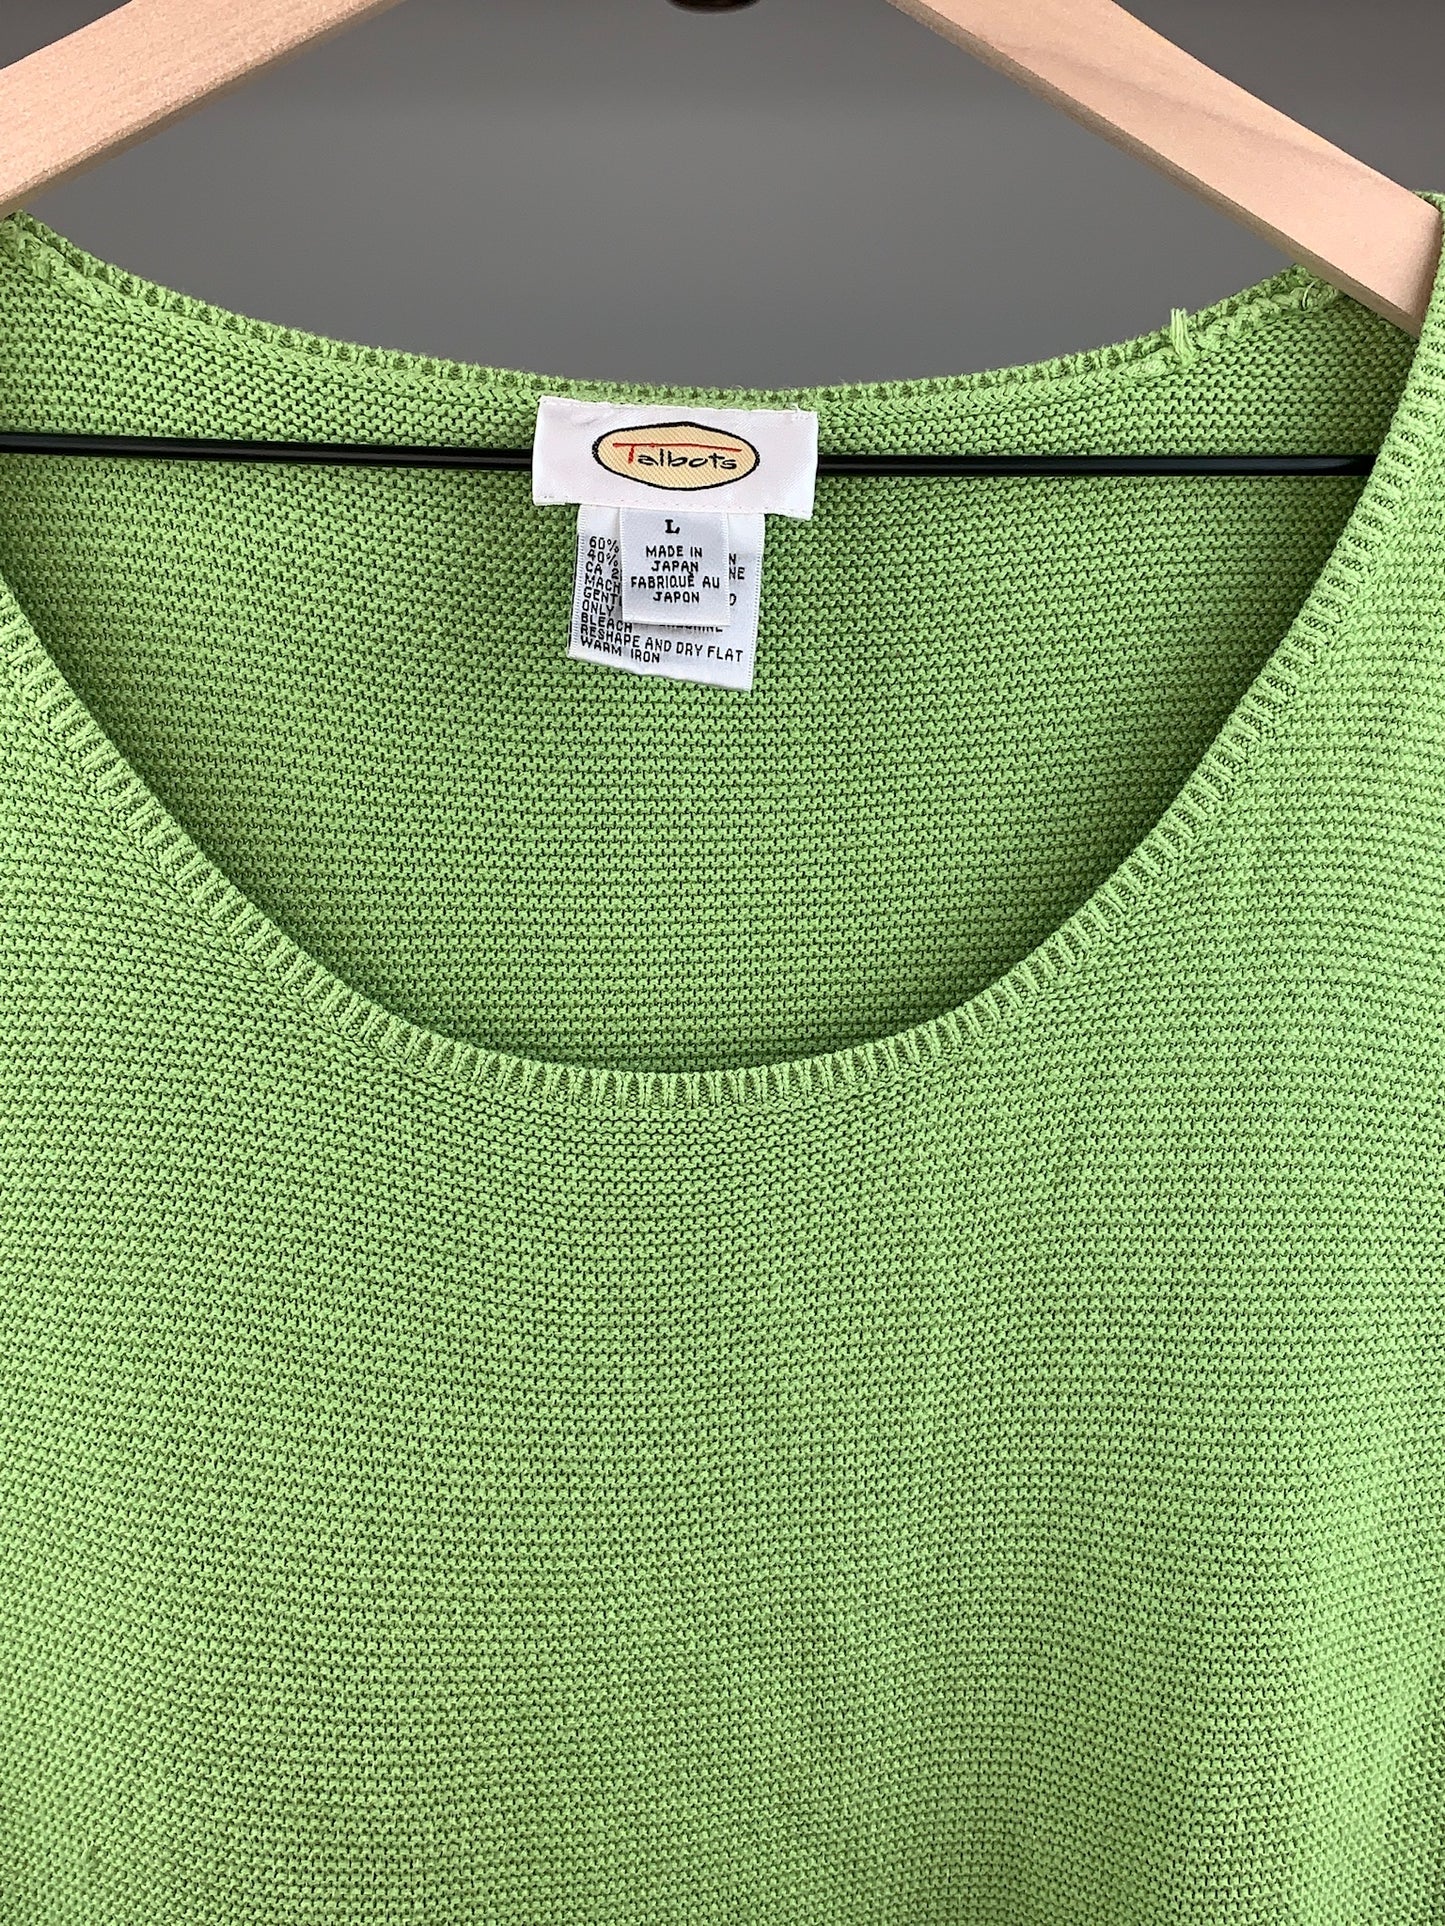 Green Knit Comfort By Talbots